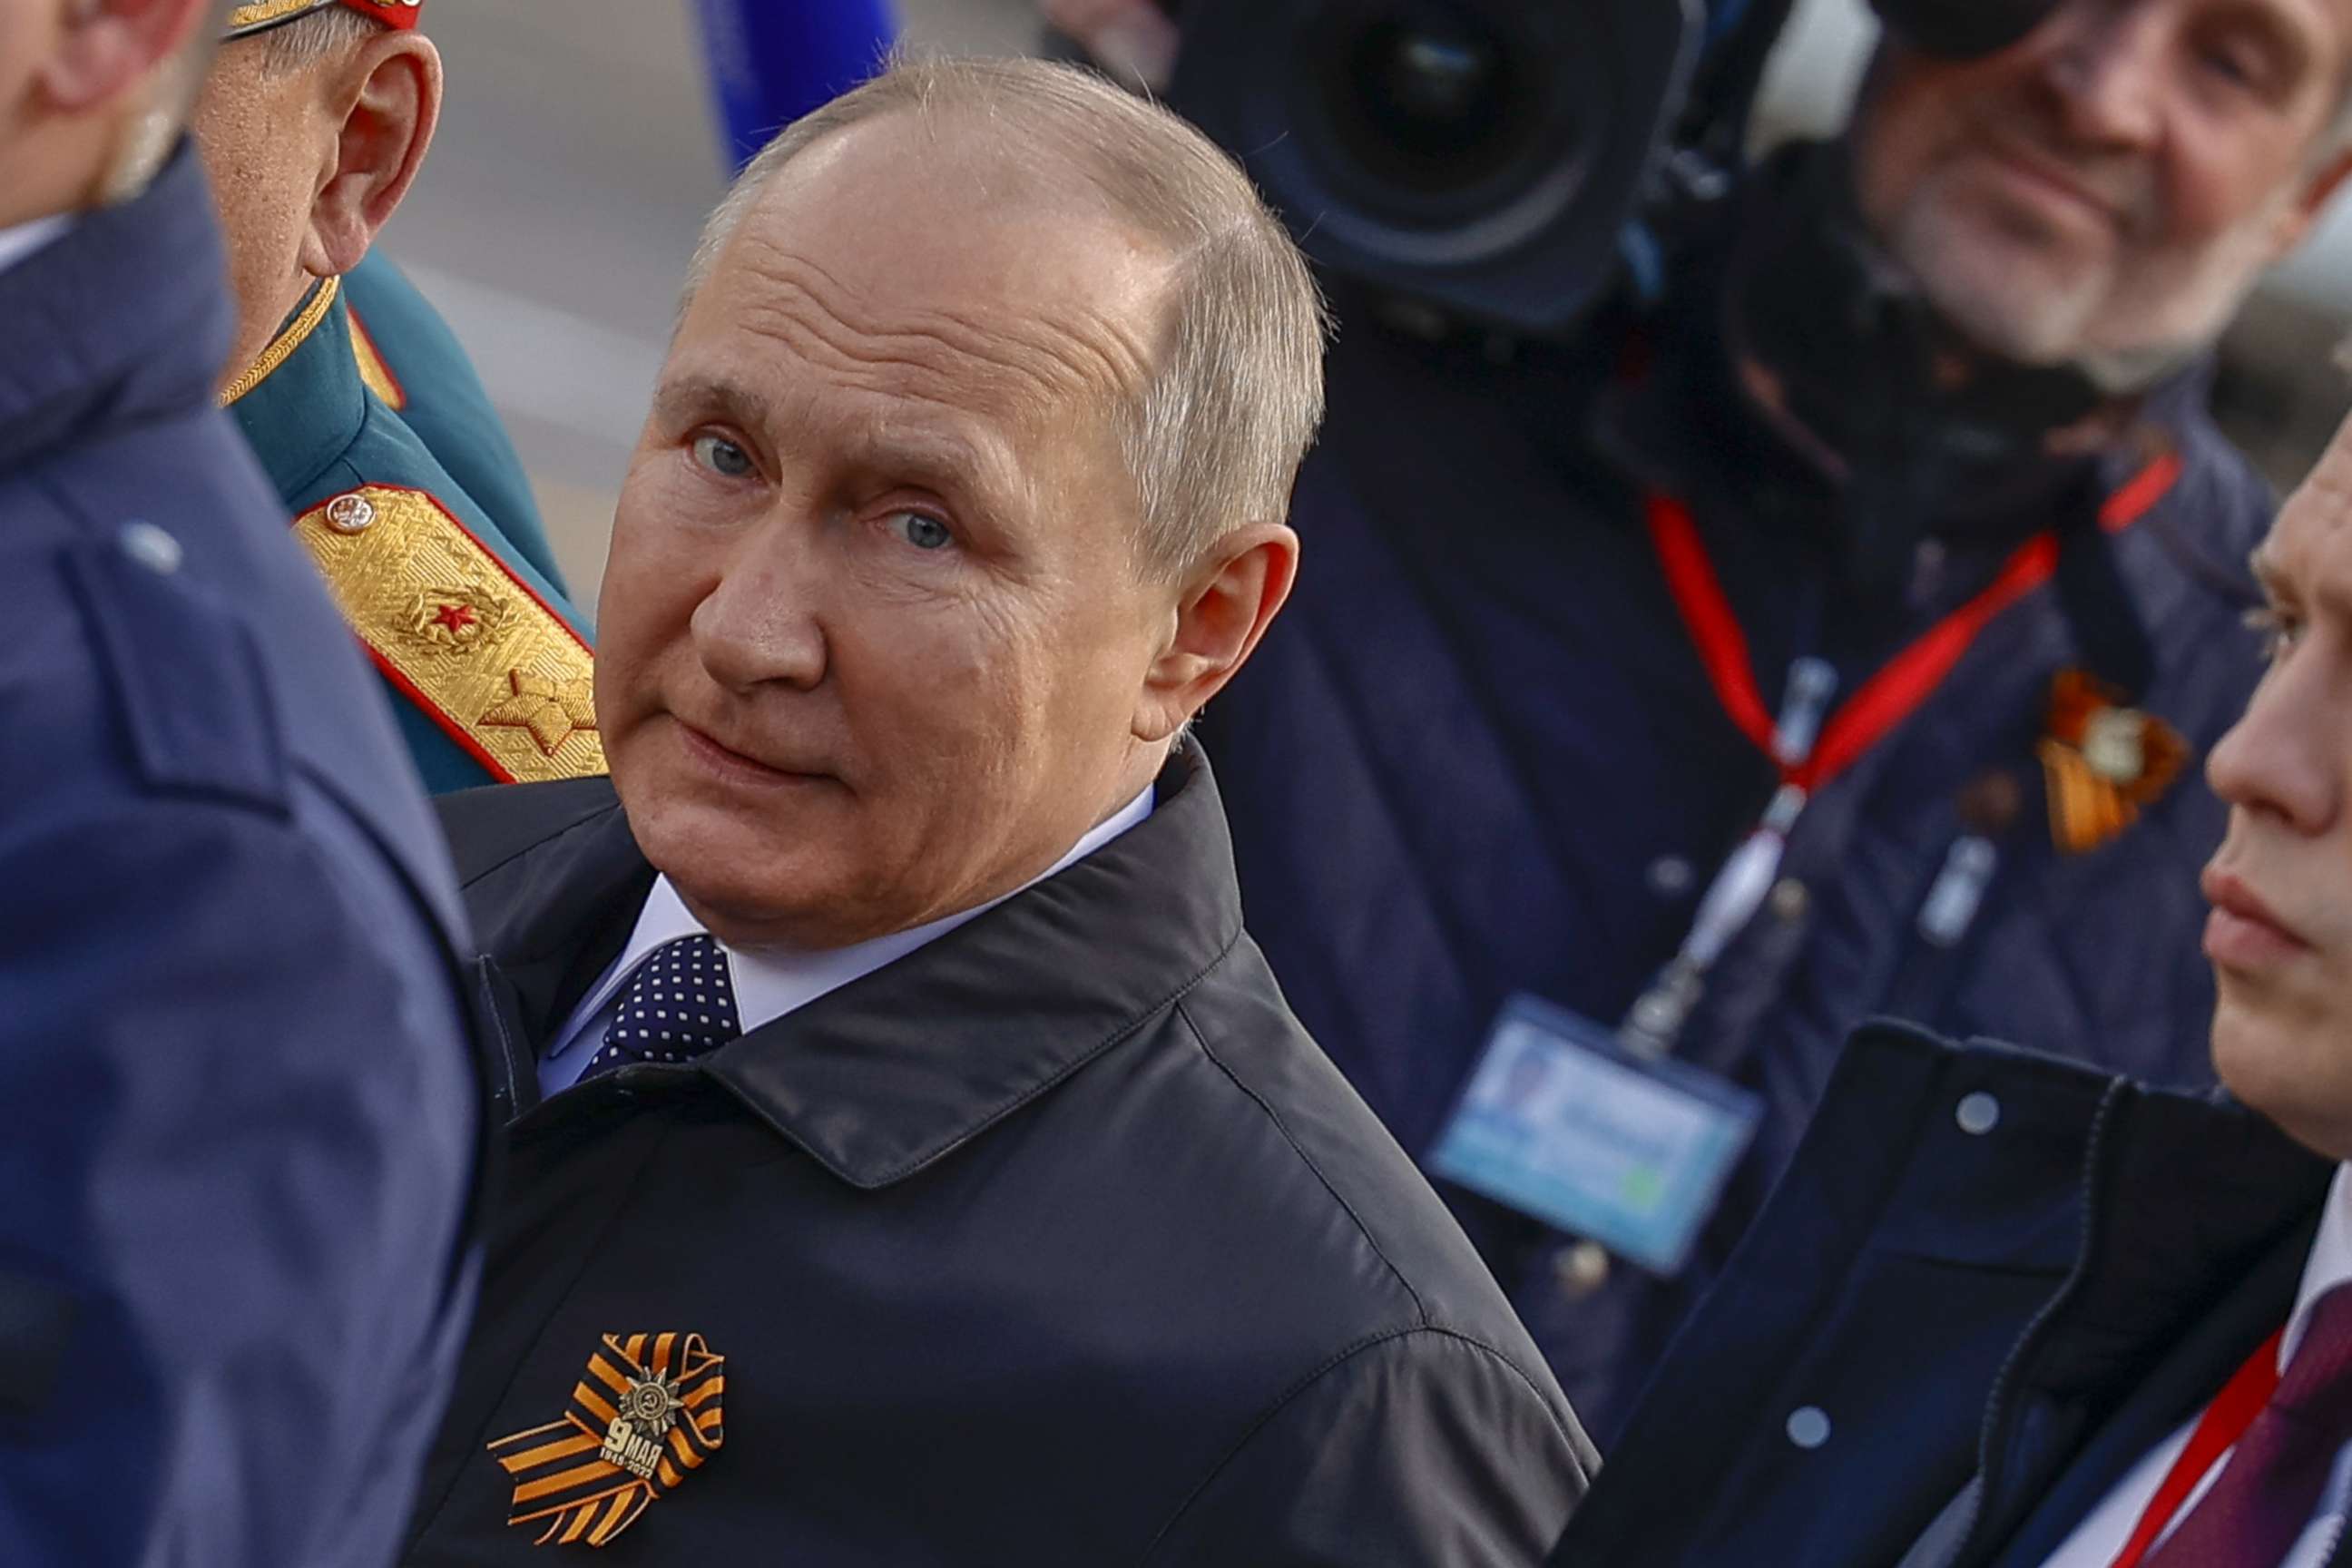 PHOTO: Russian President Vladimir Putin attends the military parade during 77th anniversary of the Victory Day in Red Square in Moscow, May 09, 2022. 